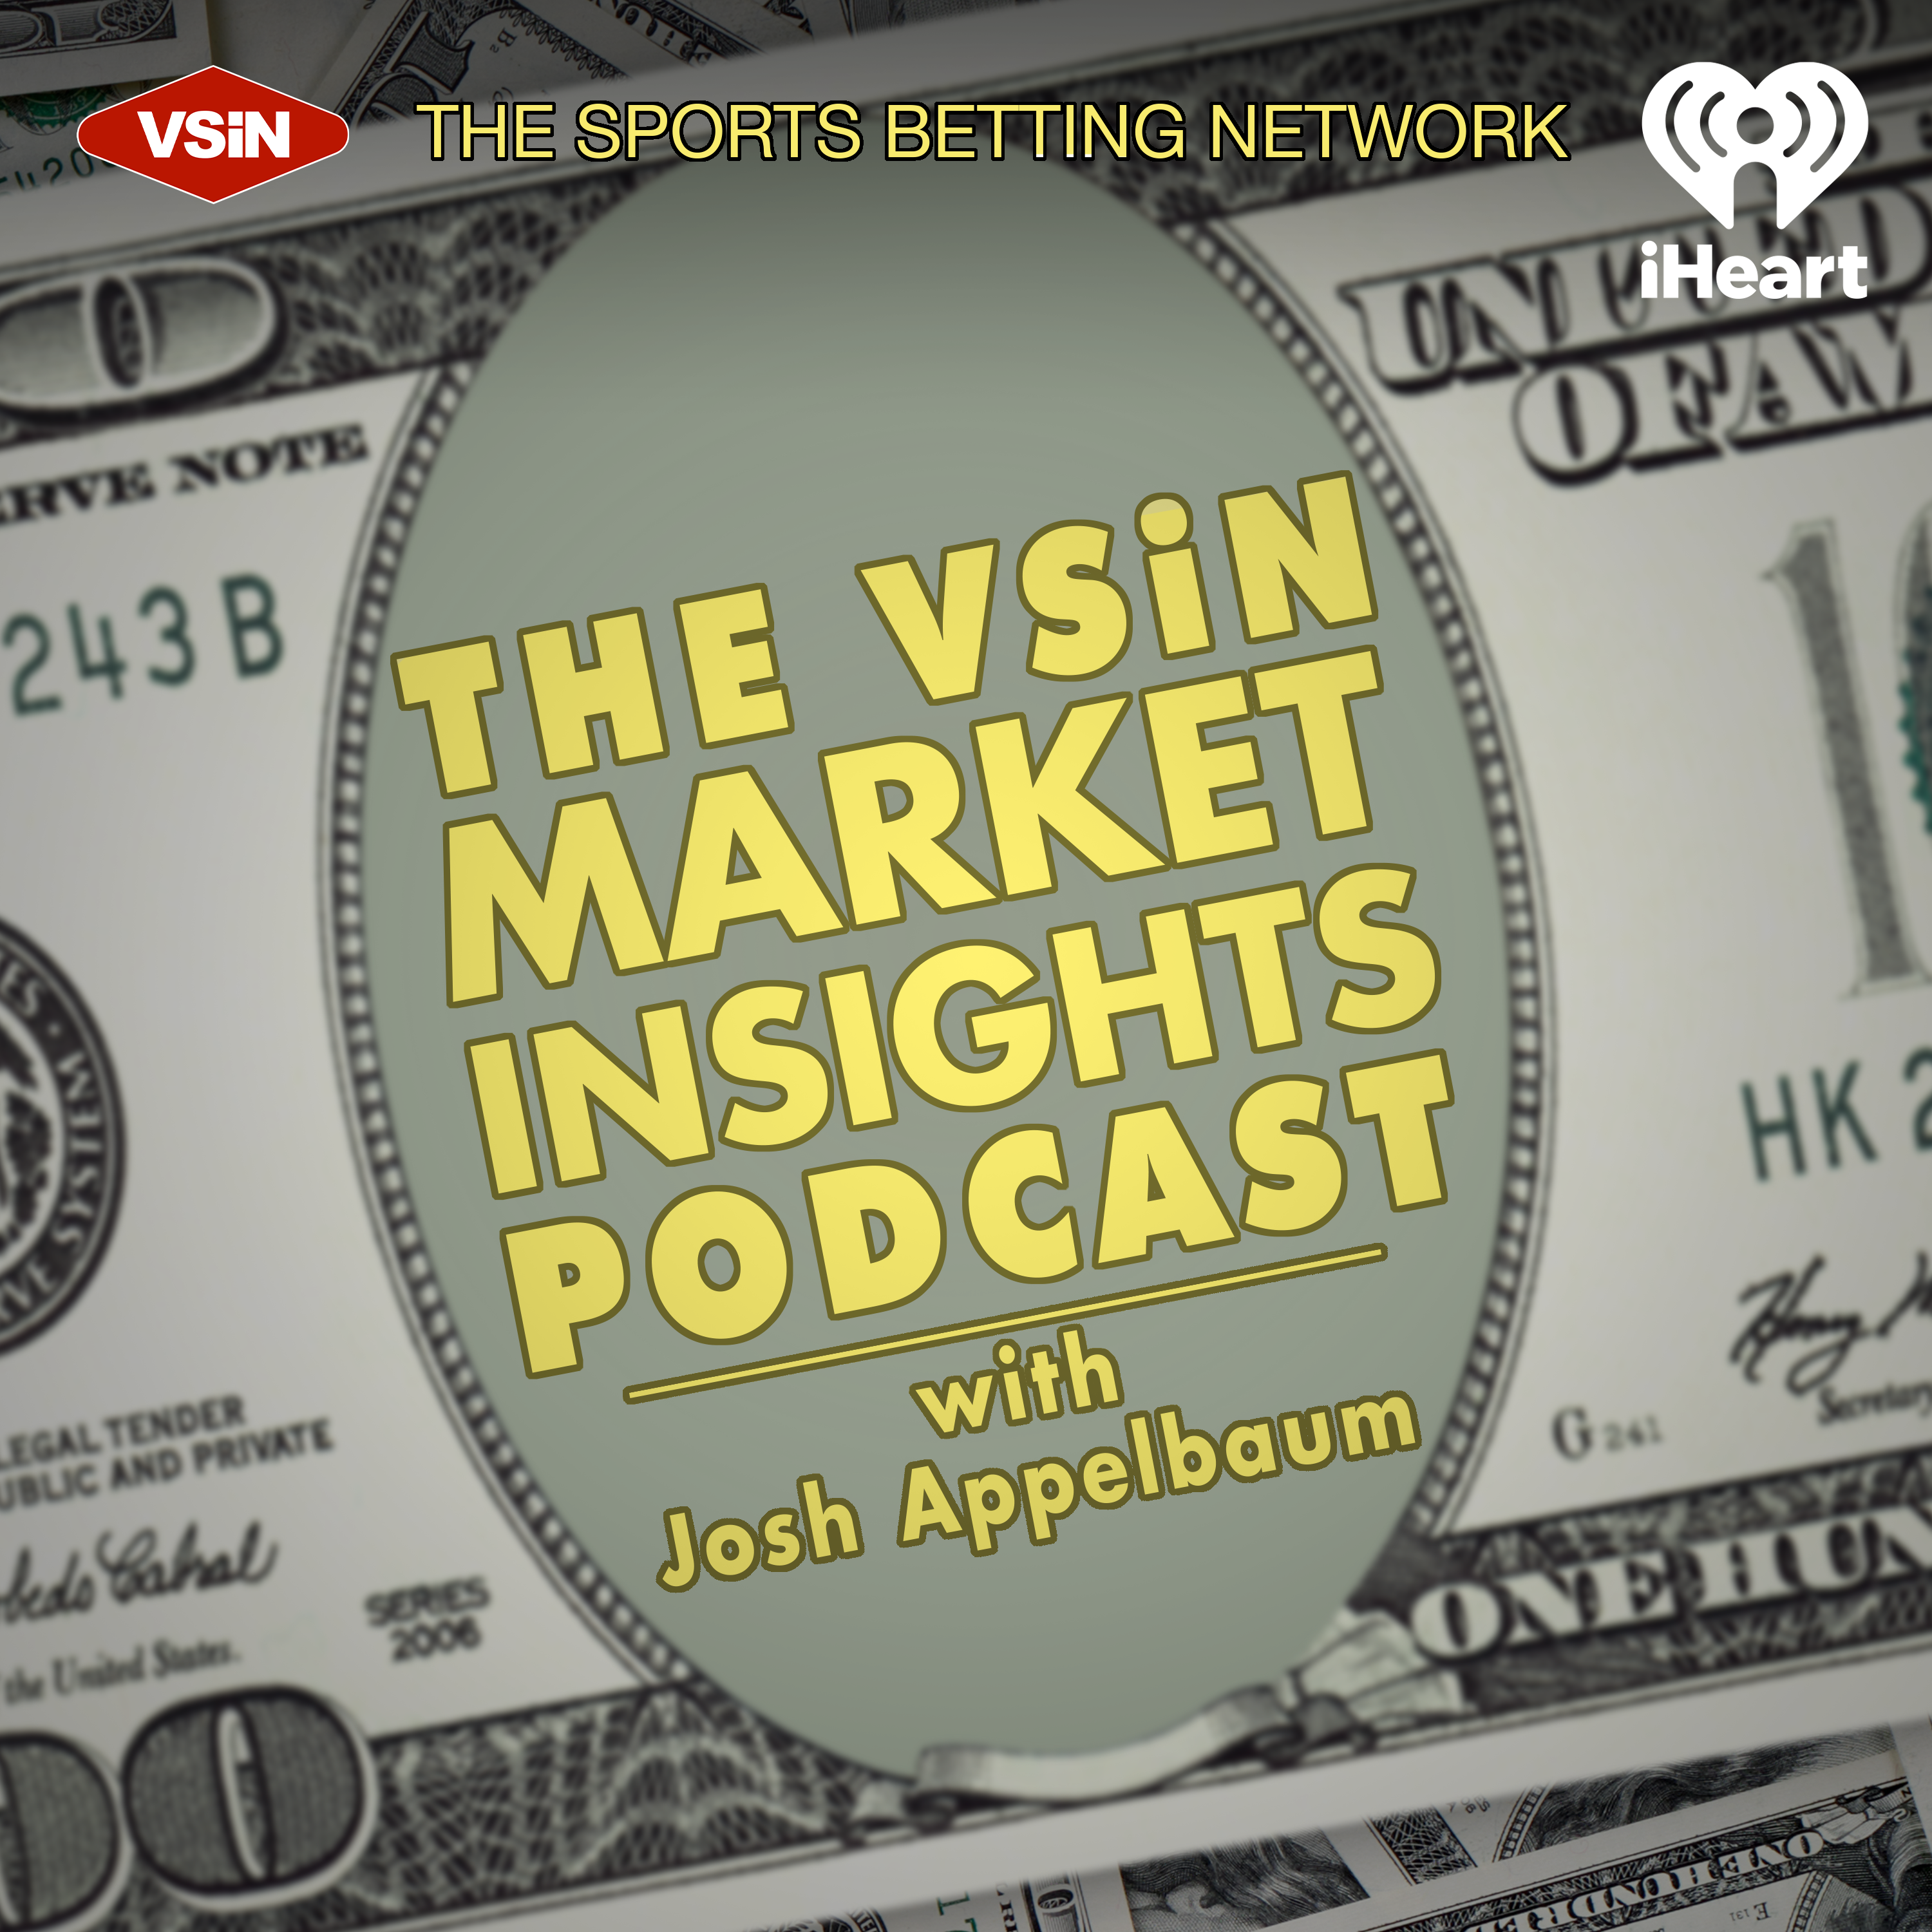 The VSiN Market Insights Podcast with Josh Appelbaum clips 